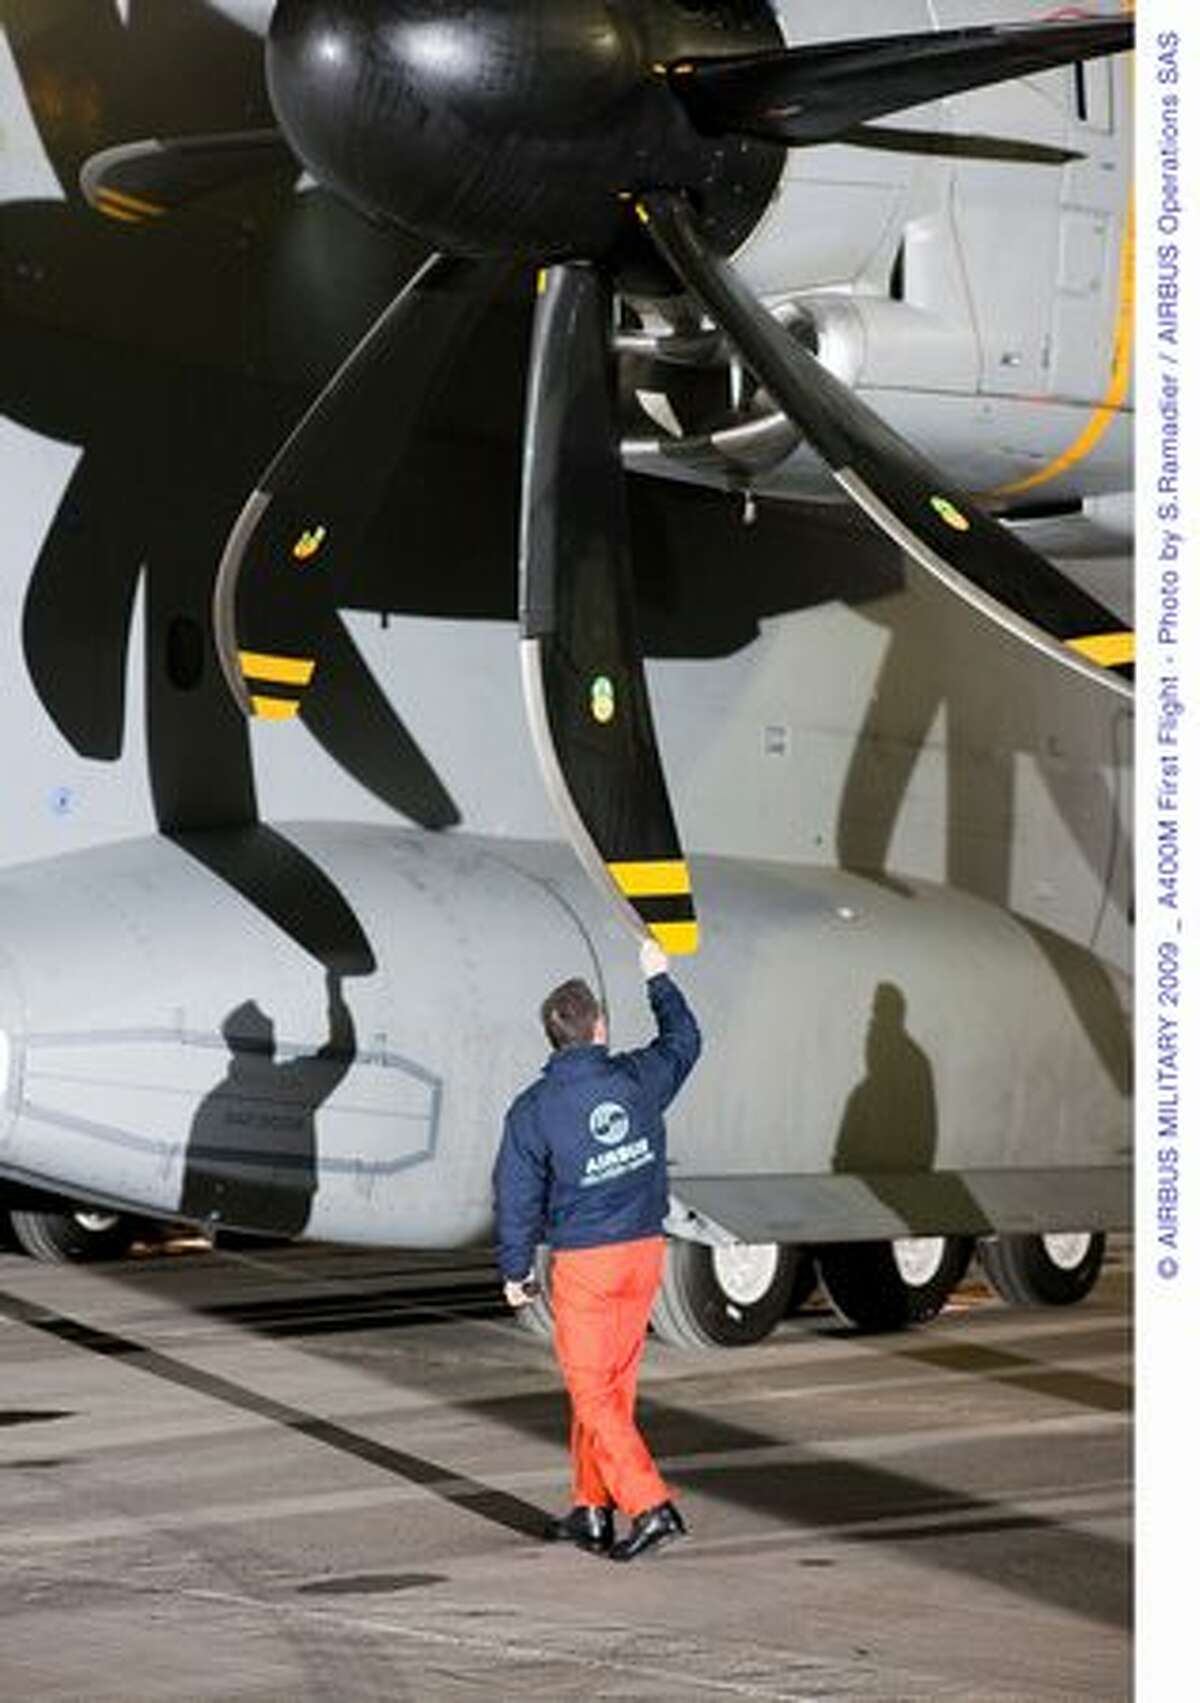 Flight crew inspects the Airbus A400M before takeoff on its first flight on Dec. 11, 2009 in Seville, Spain. (Airbus photo)